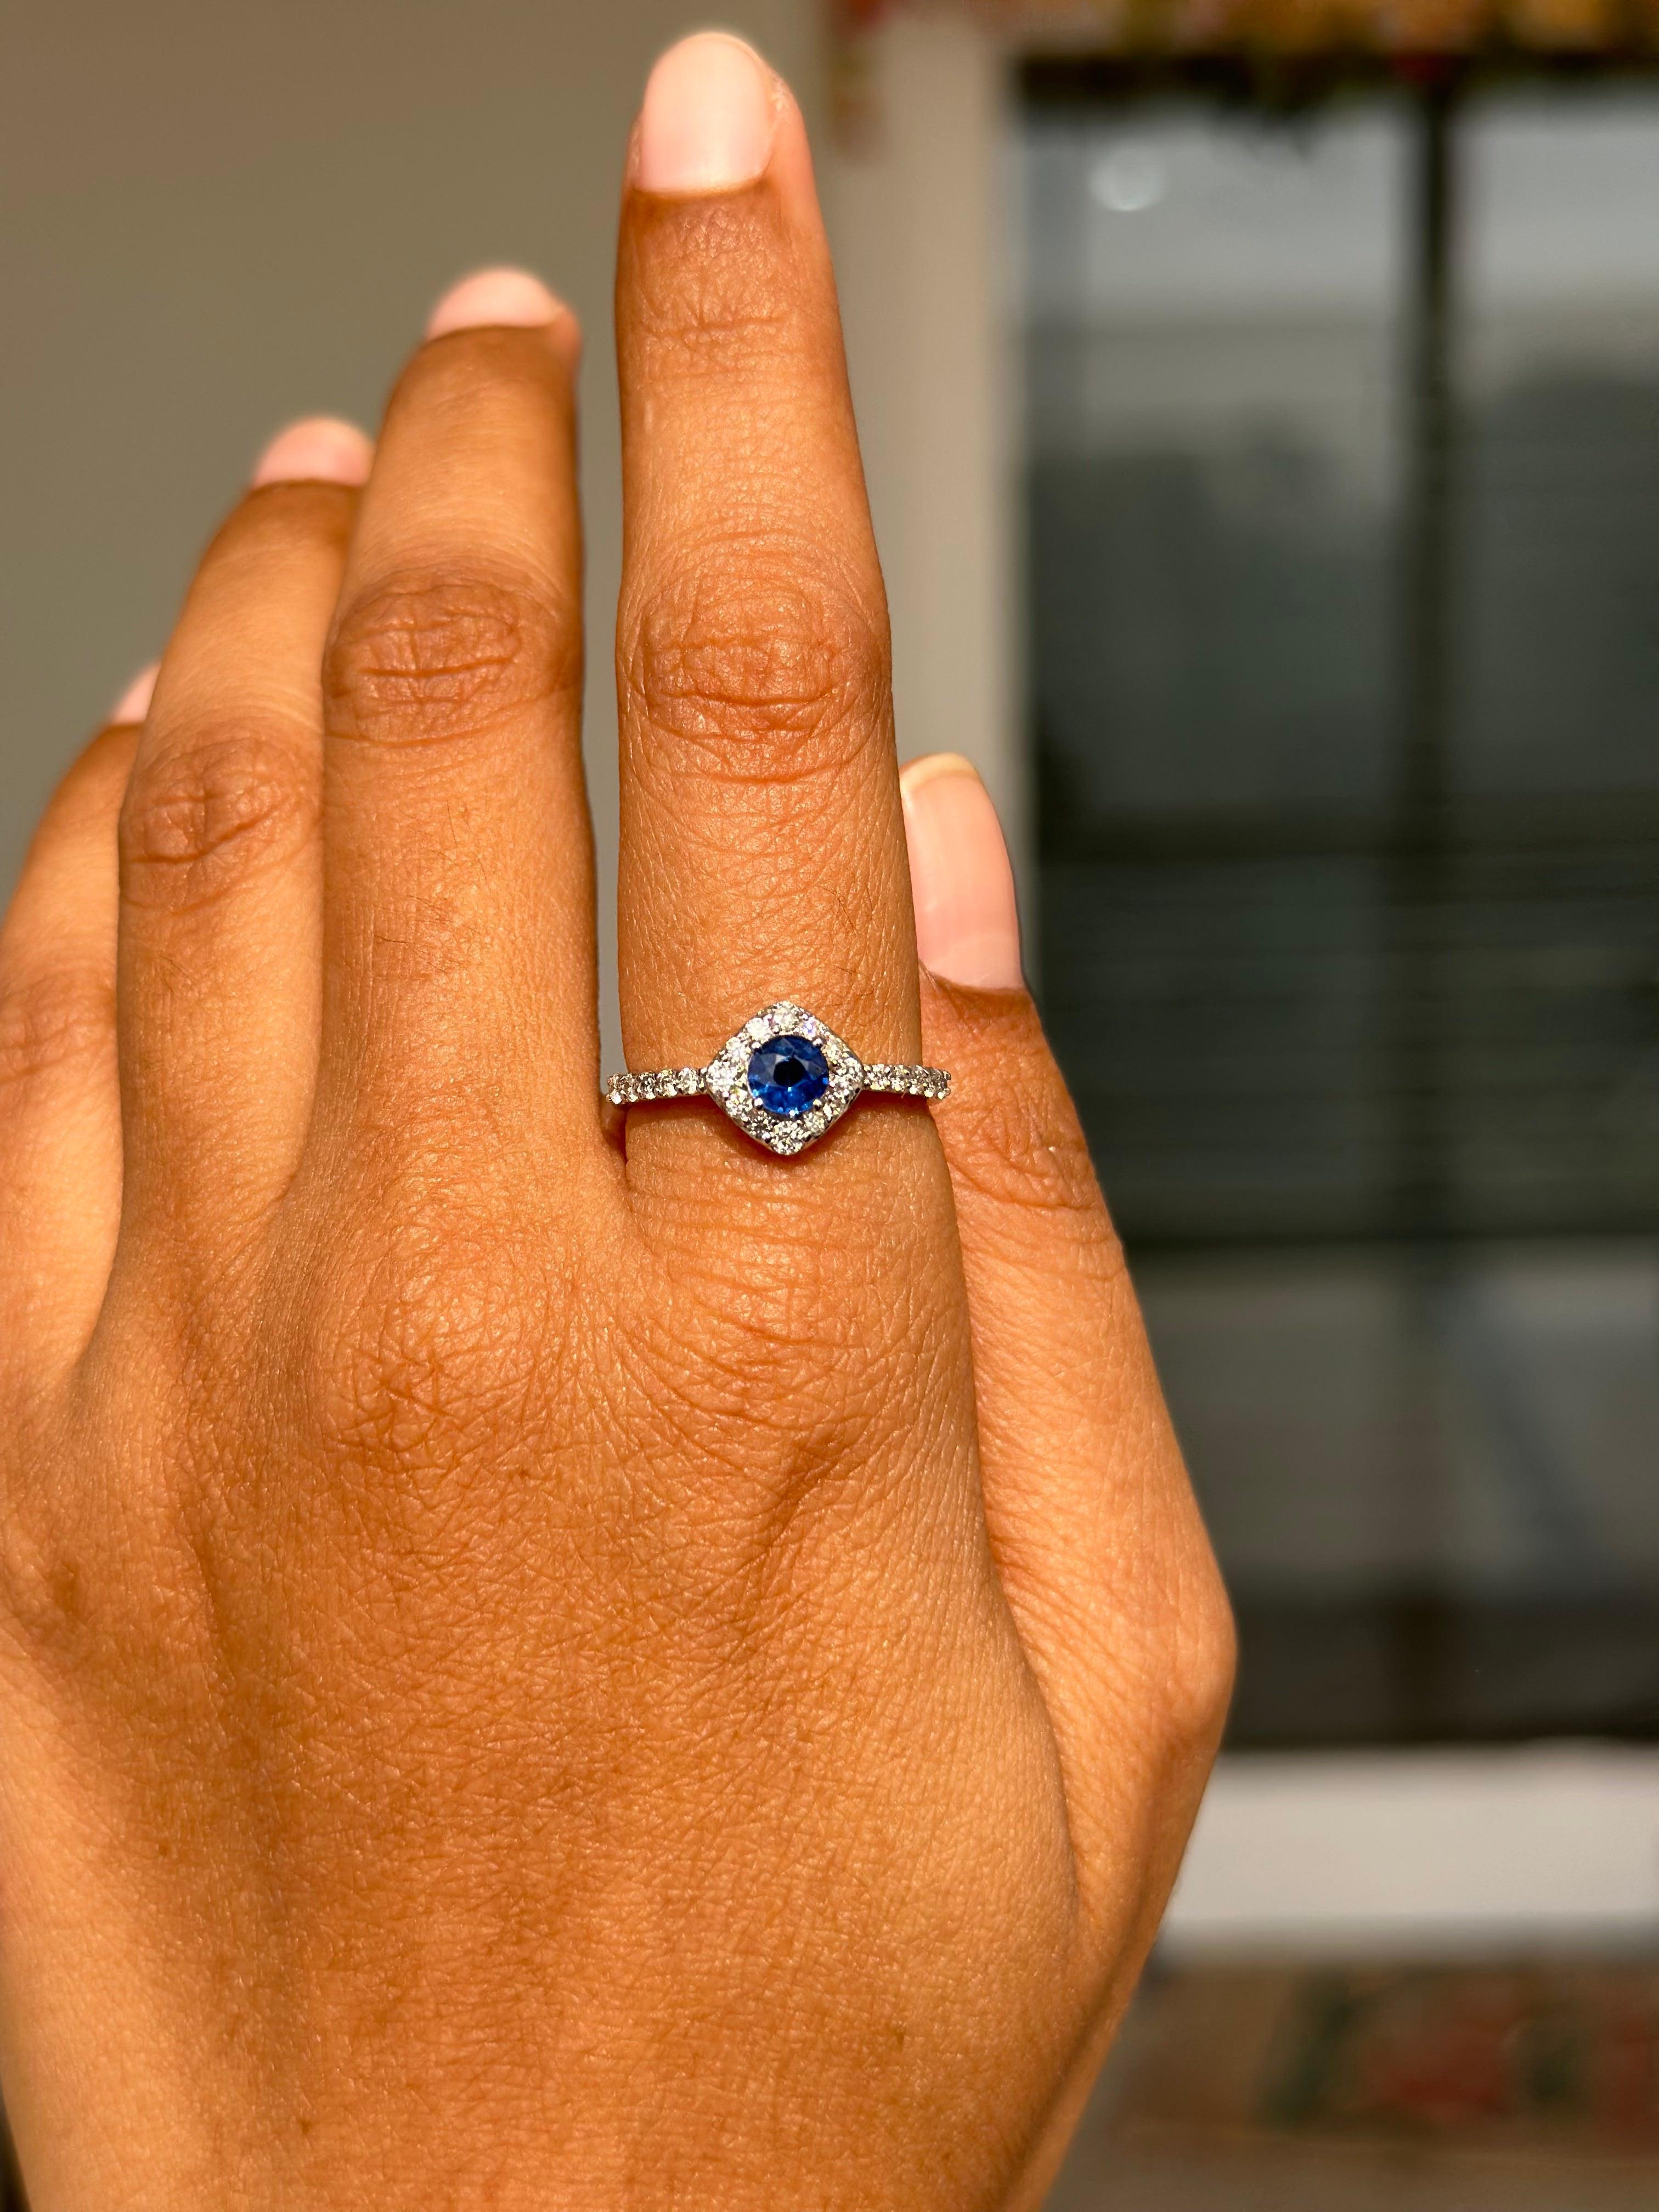 For Sale:  Royal Blue Sapphire with Halo Diamond Ring Crafted in Solid 14k White Gold 5